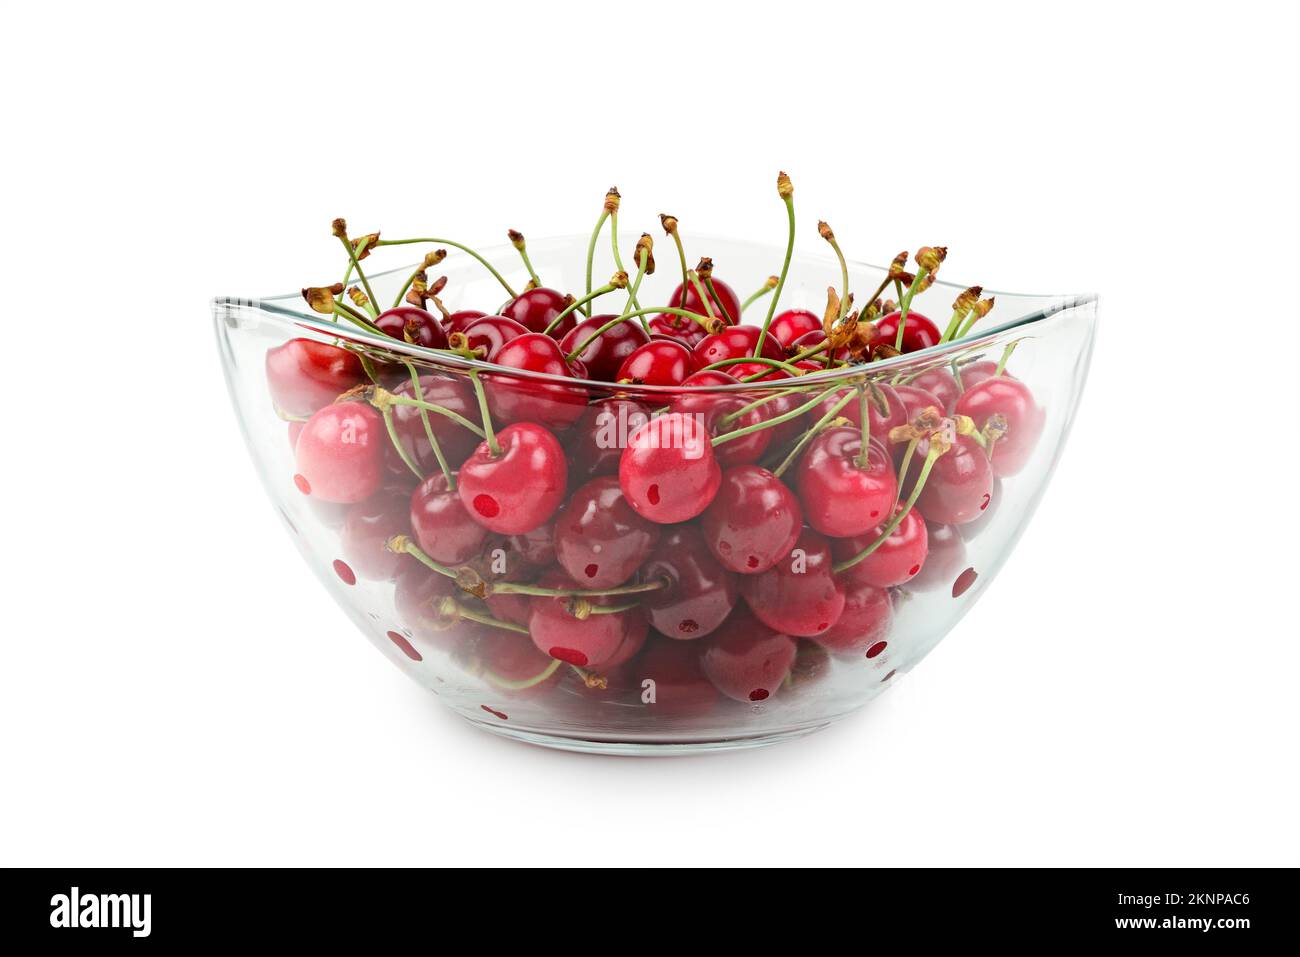 fruits of cherries in a glass bowl Stock Photo